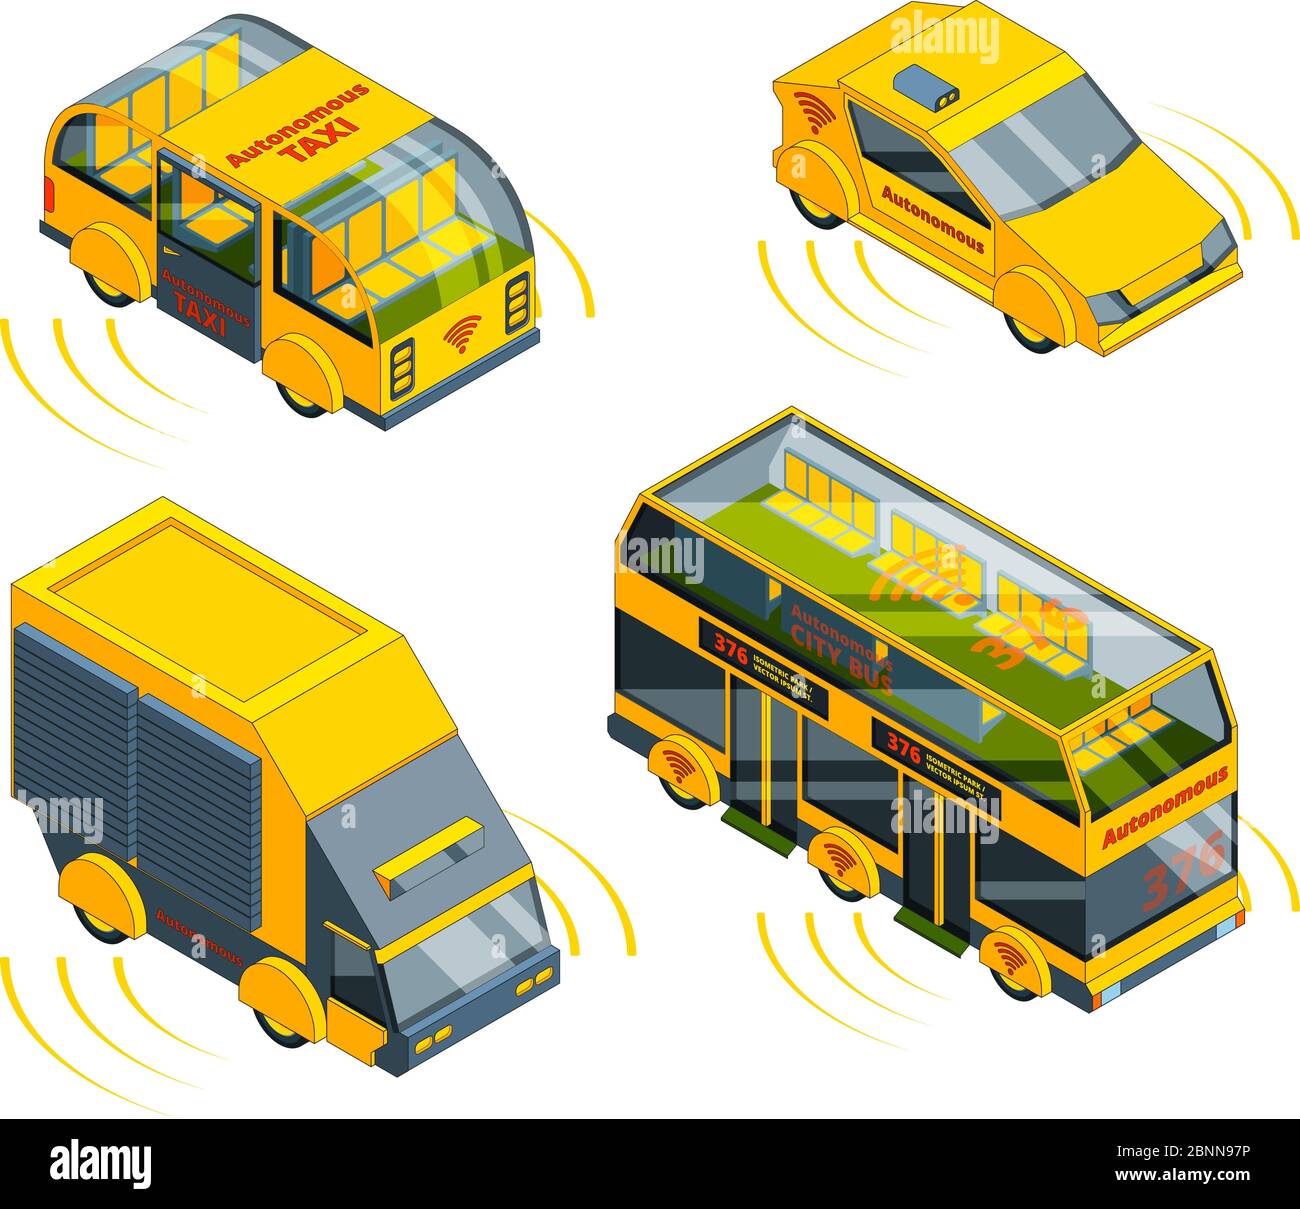 Autonomous vehicle. Unmanned transport at road emergency cars train taxi and buses isometric vector pictures Stock Vector